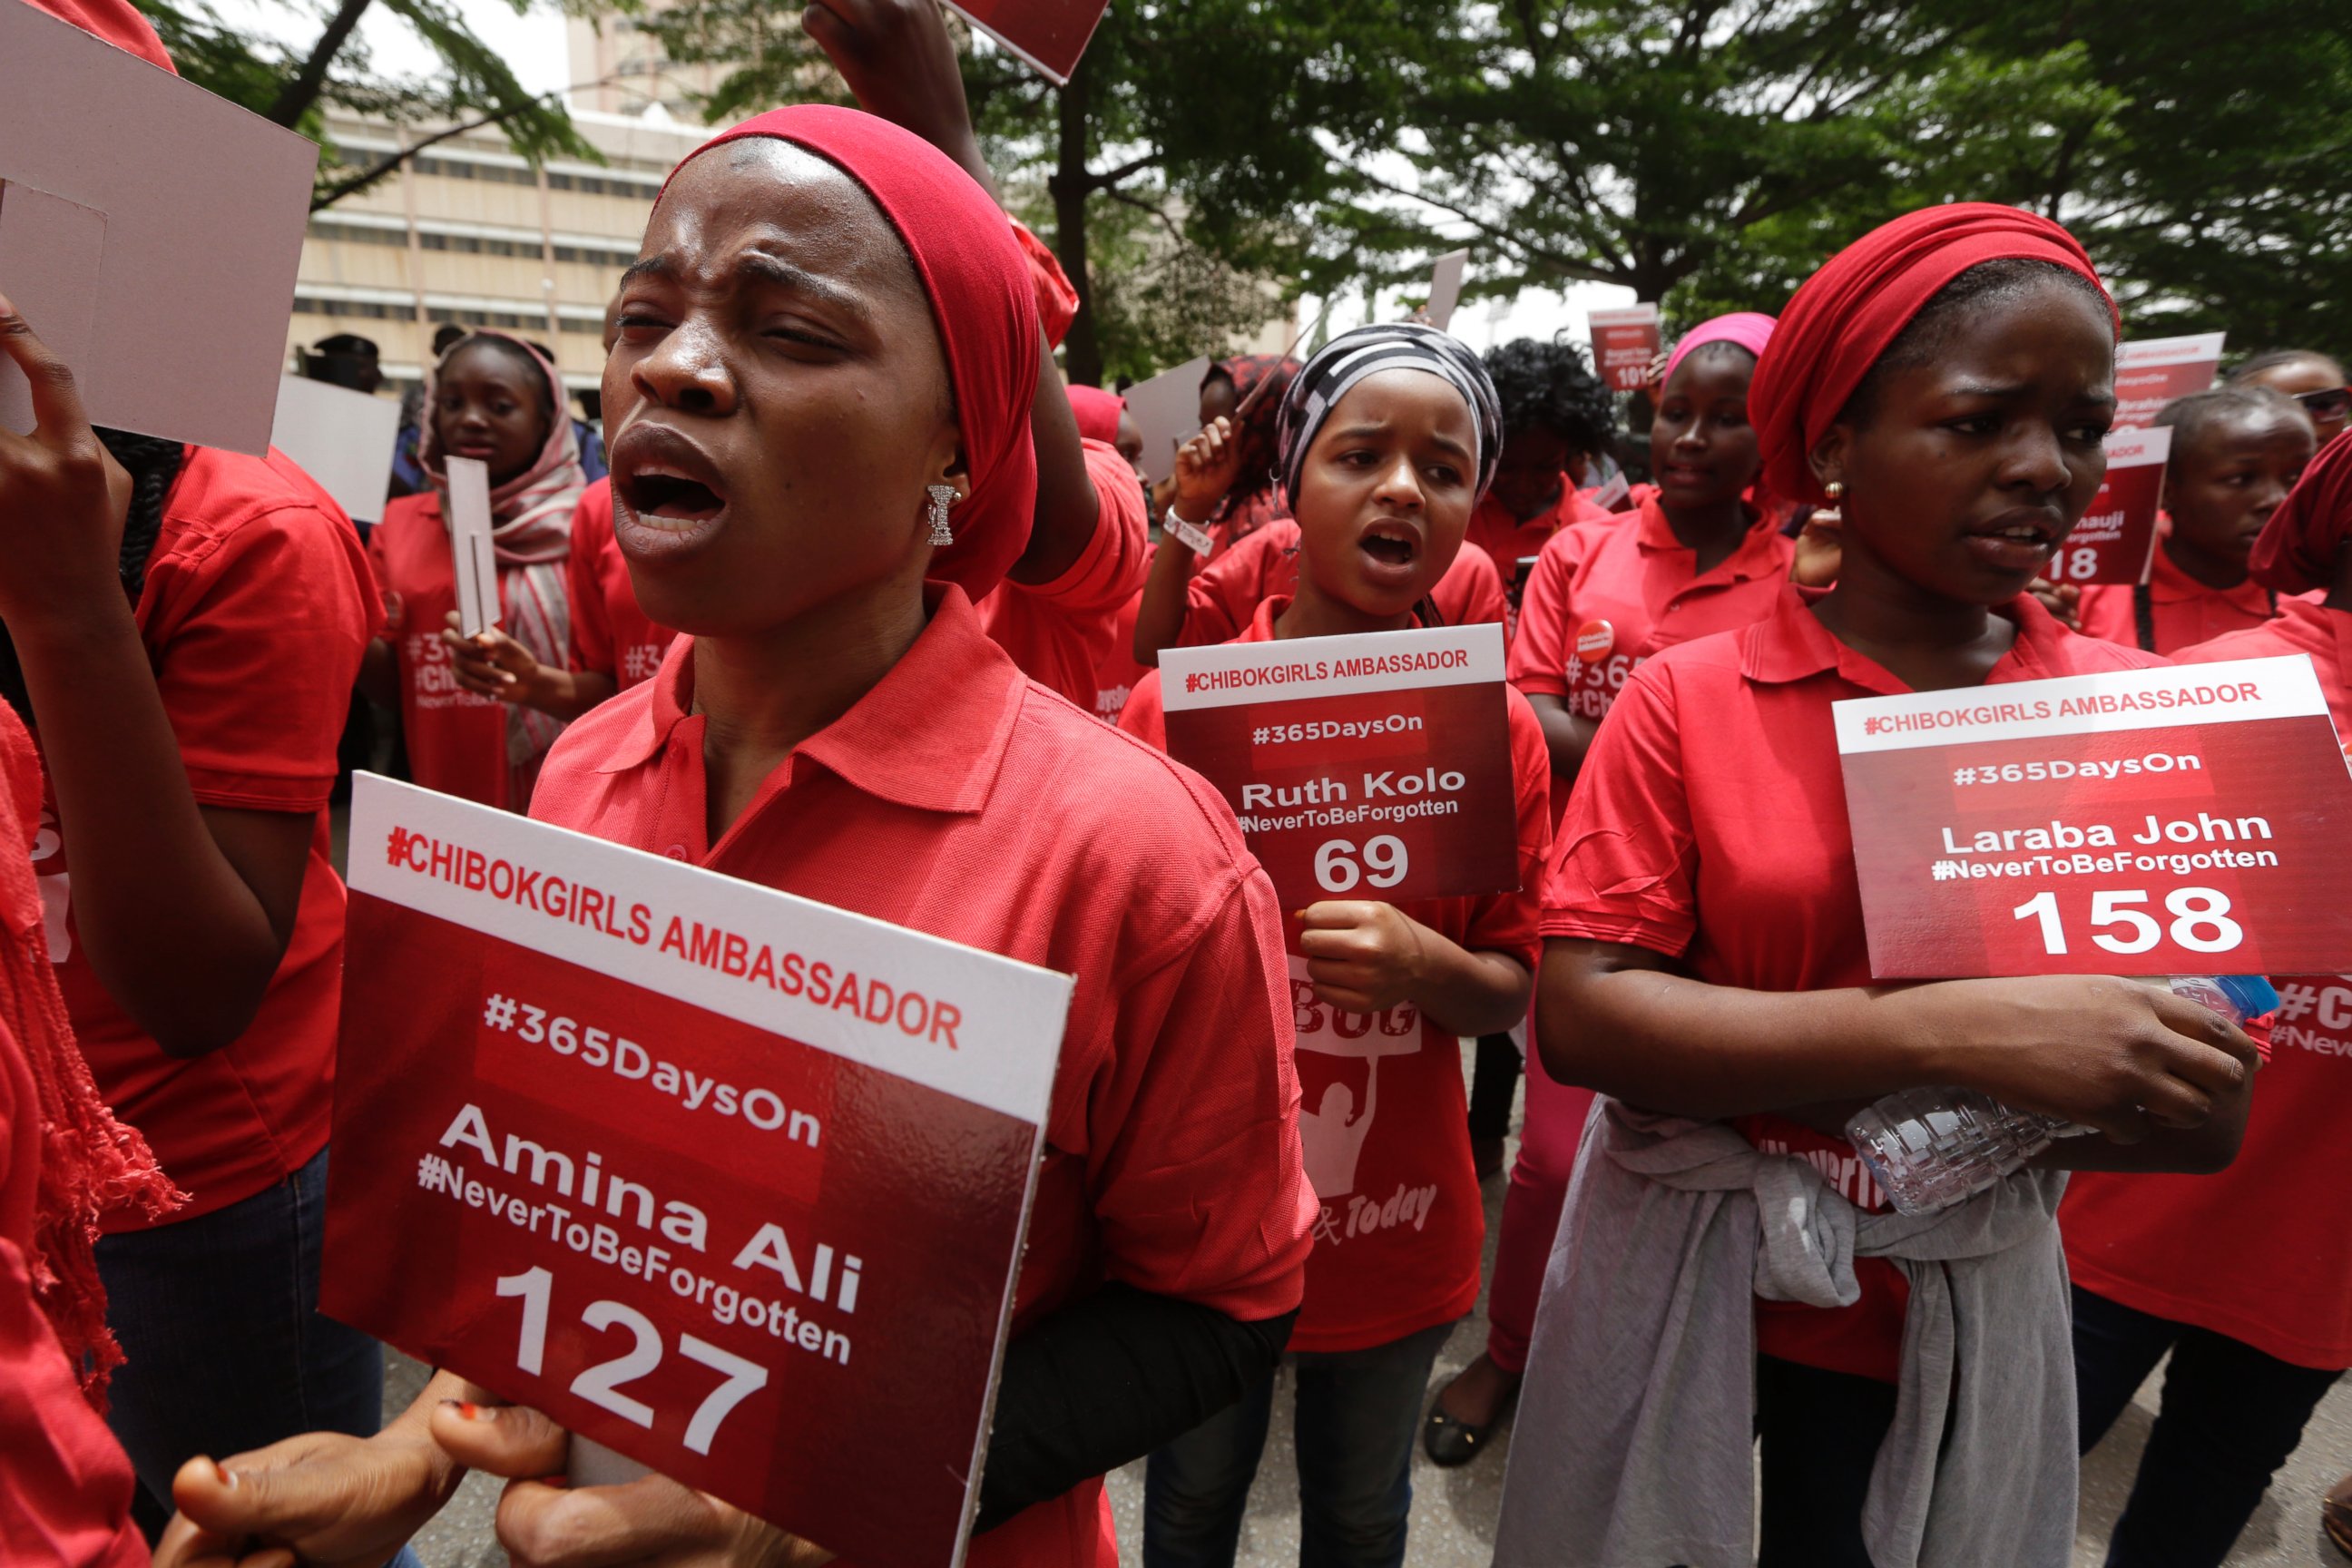 PHOTO:In this file photo, Young girls known as Chibok Ambassadors, carry signs bearing the names of the girls kidnapped from the government secondary school in Chibok during a demonstration, in Abuja, Nigeria, April 14, 2015.   